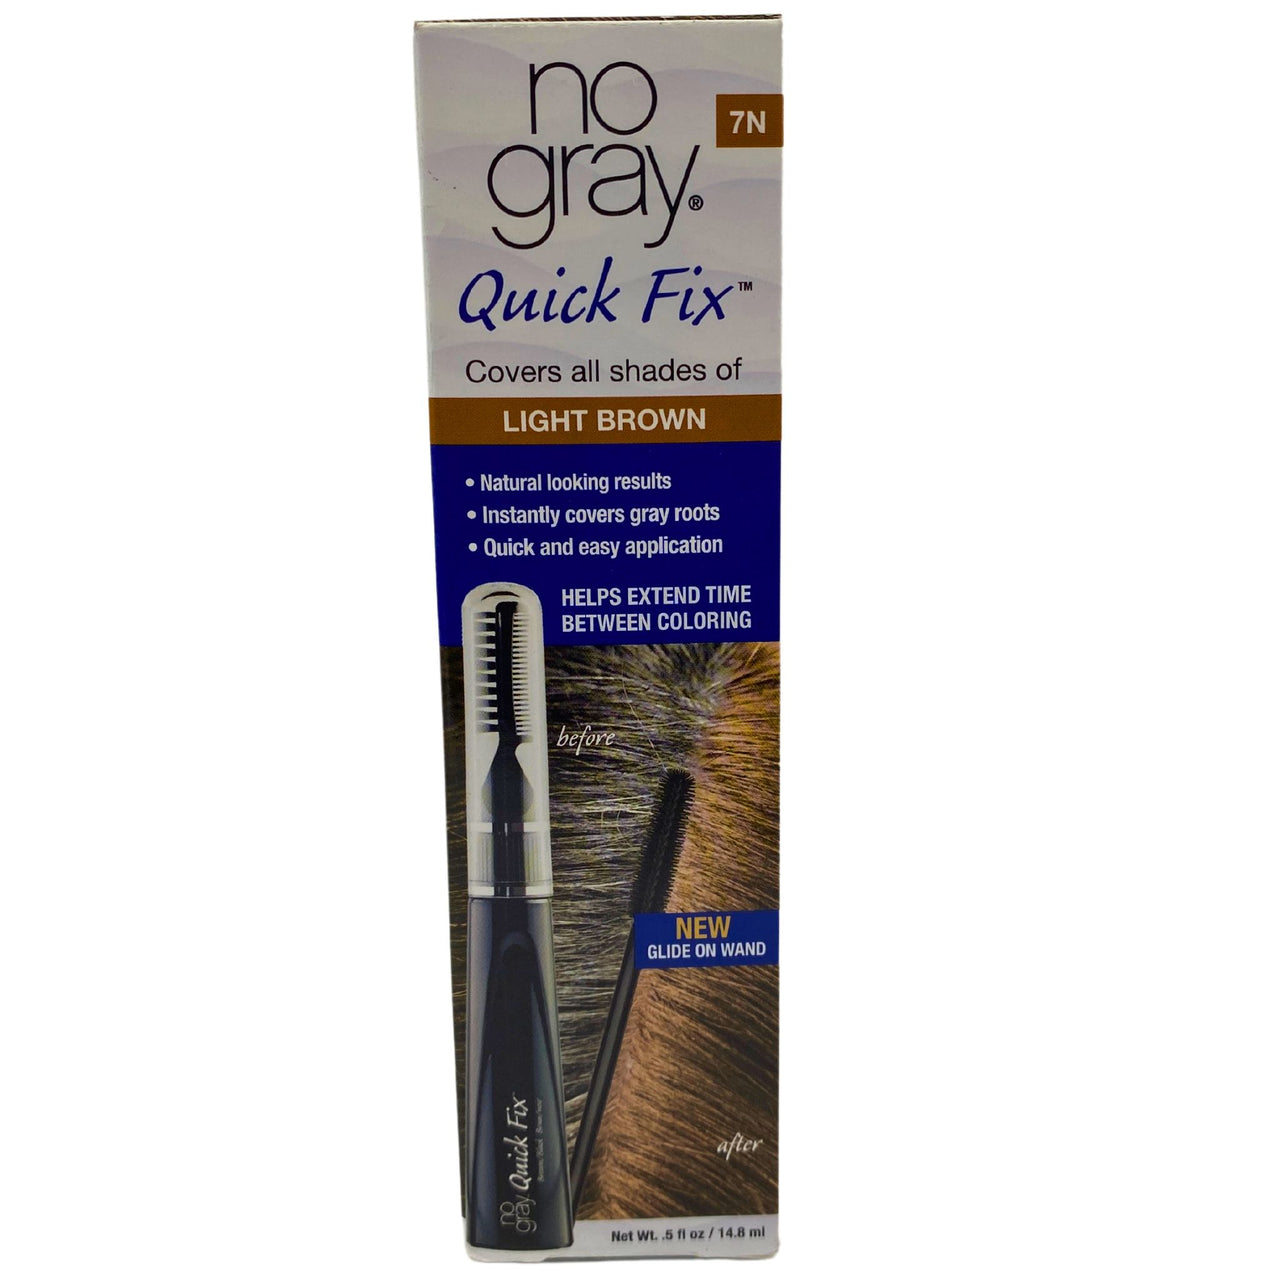 No Gray 7N Quick Fix Covers All Shades of Light Brown Glide on Wand 5OZ